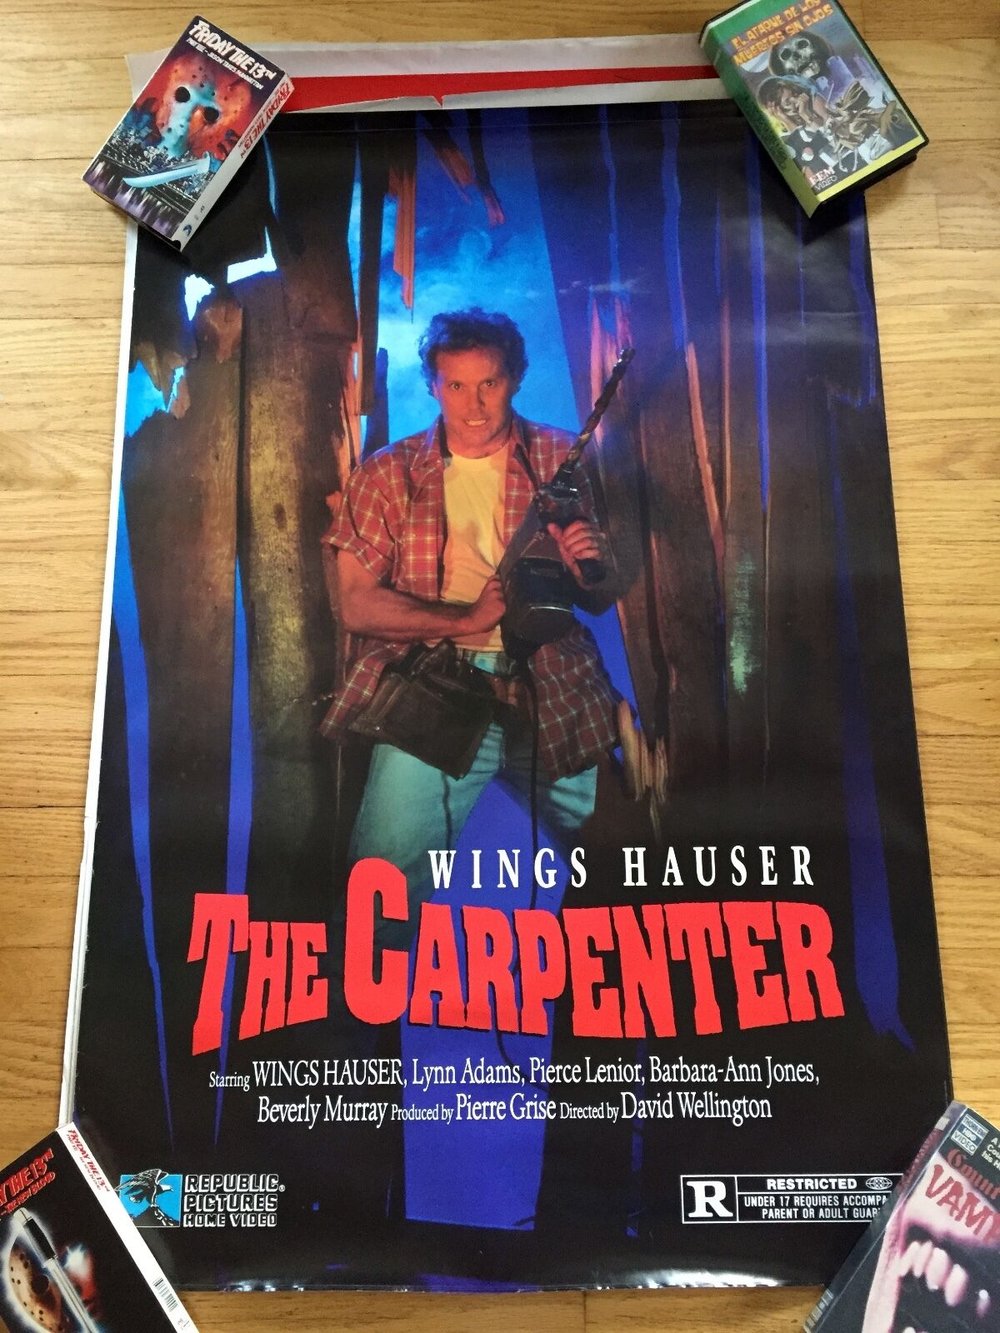 1988 THE CARPENTER Original Republic Pictures Video Promotional One sheet Movie Poster